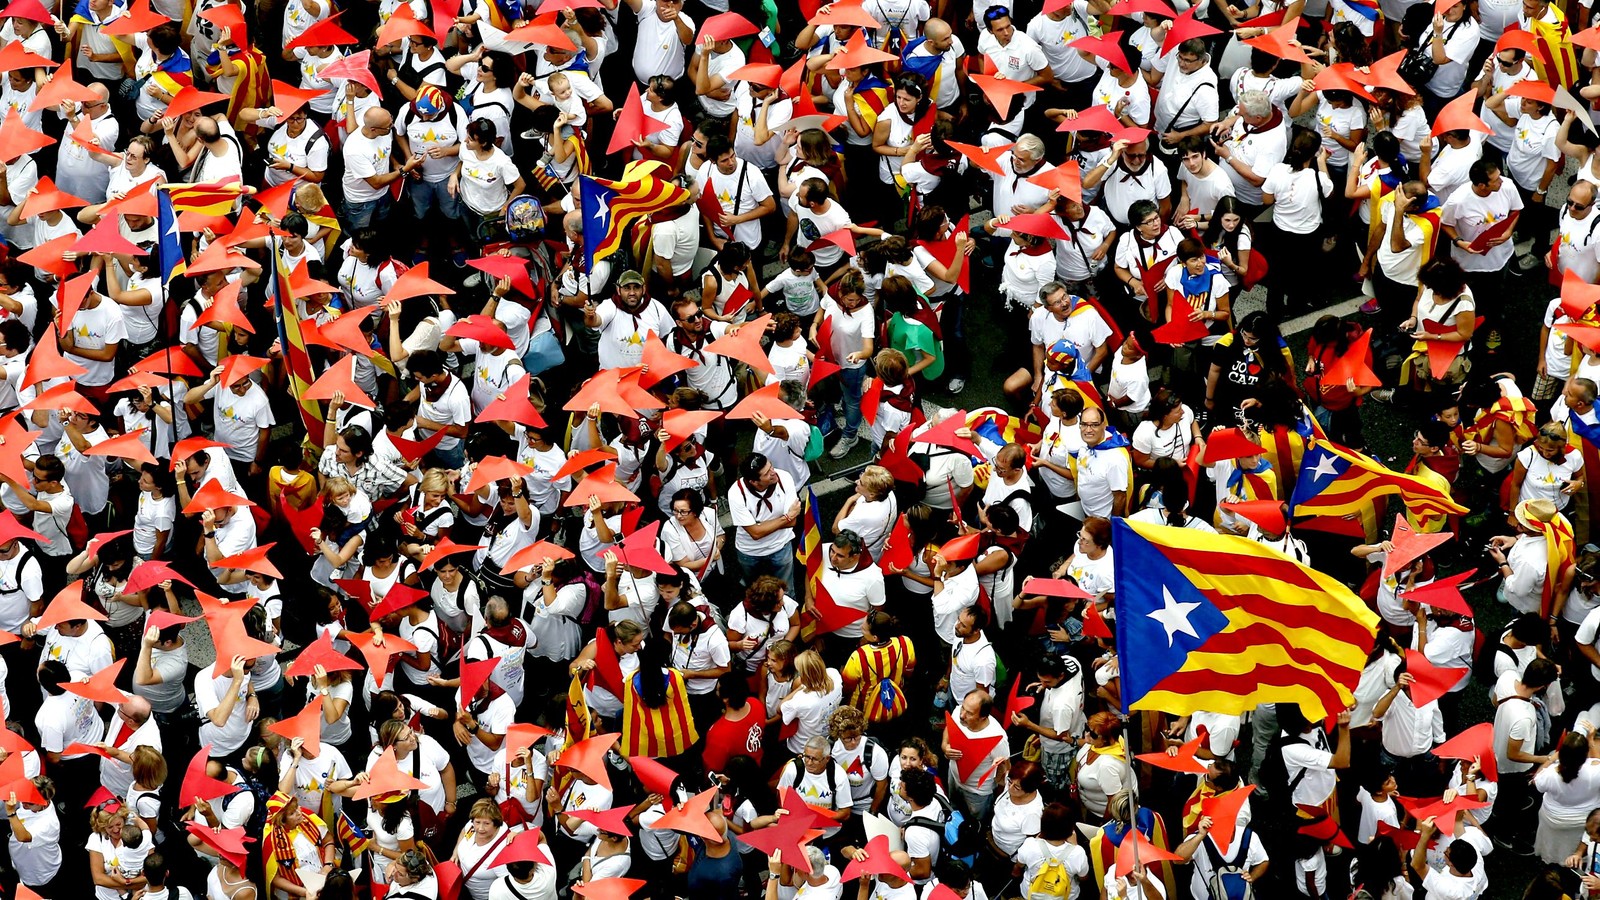 Language rights in Catalonia